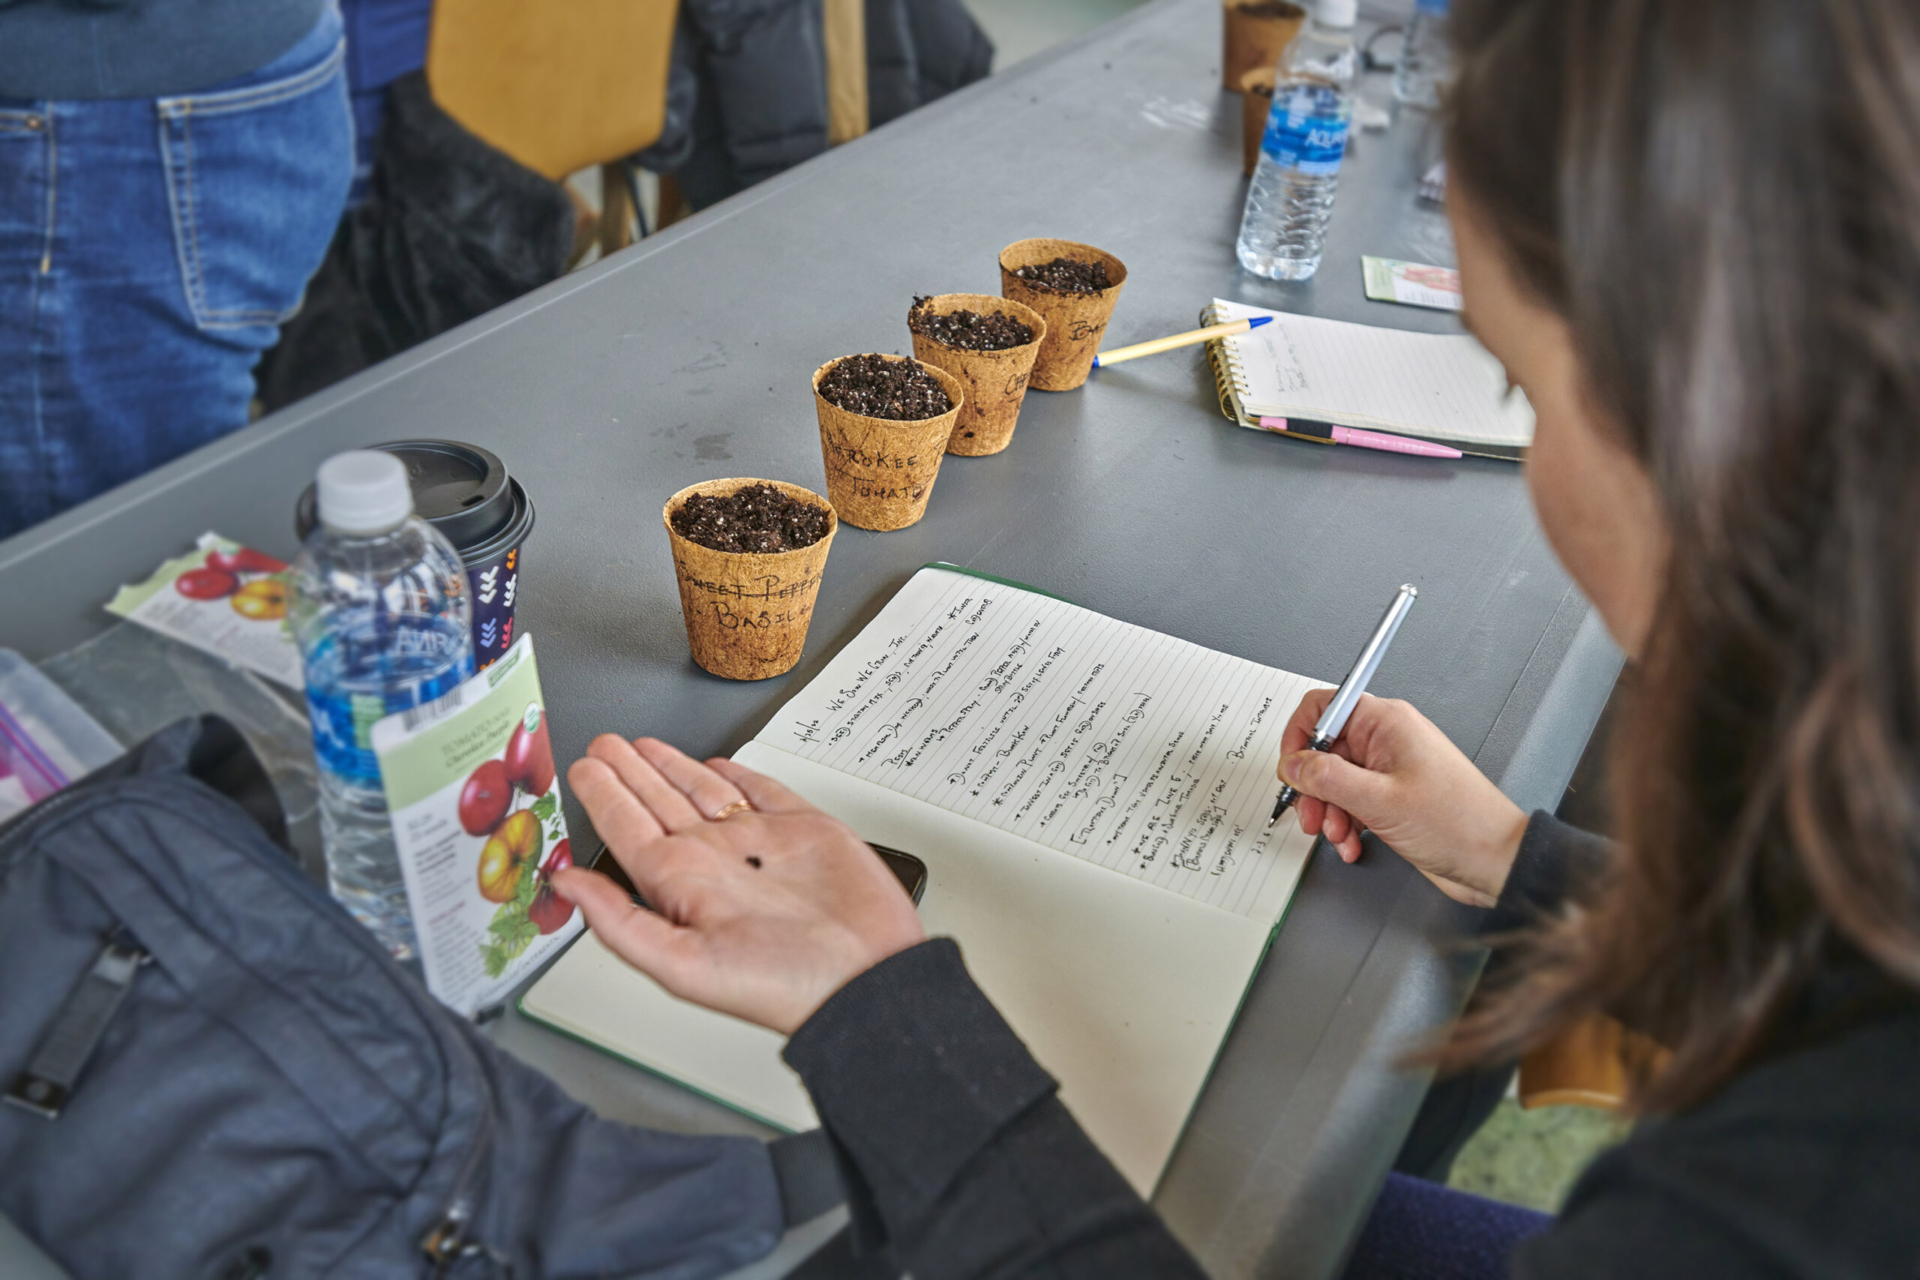 A person holding a seed and recording information in a notebook, four small seed starter pots on the table.